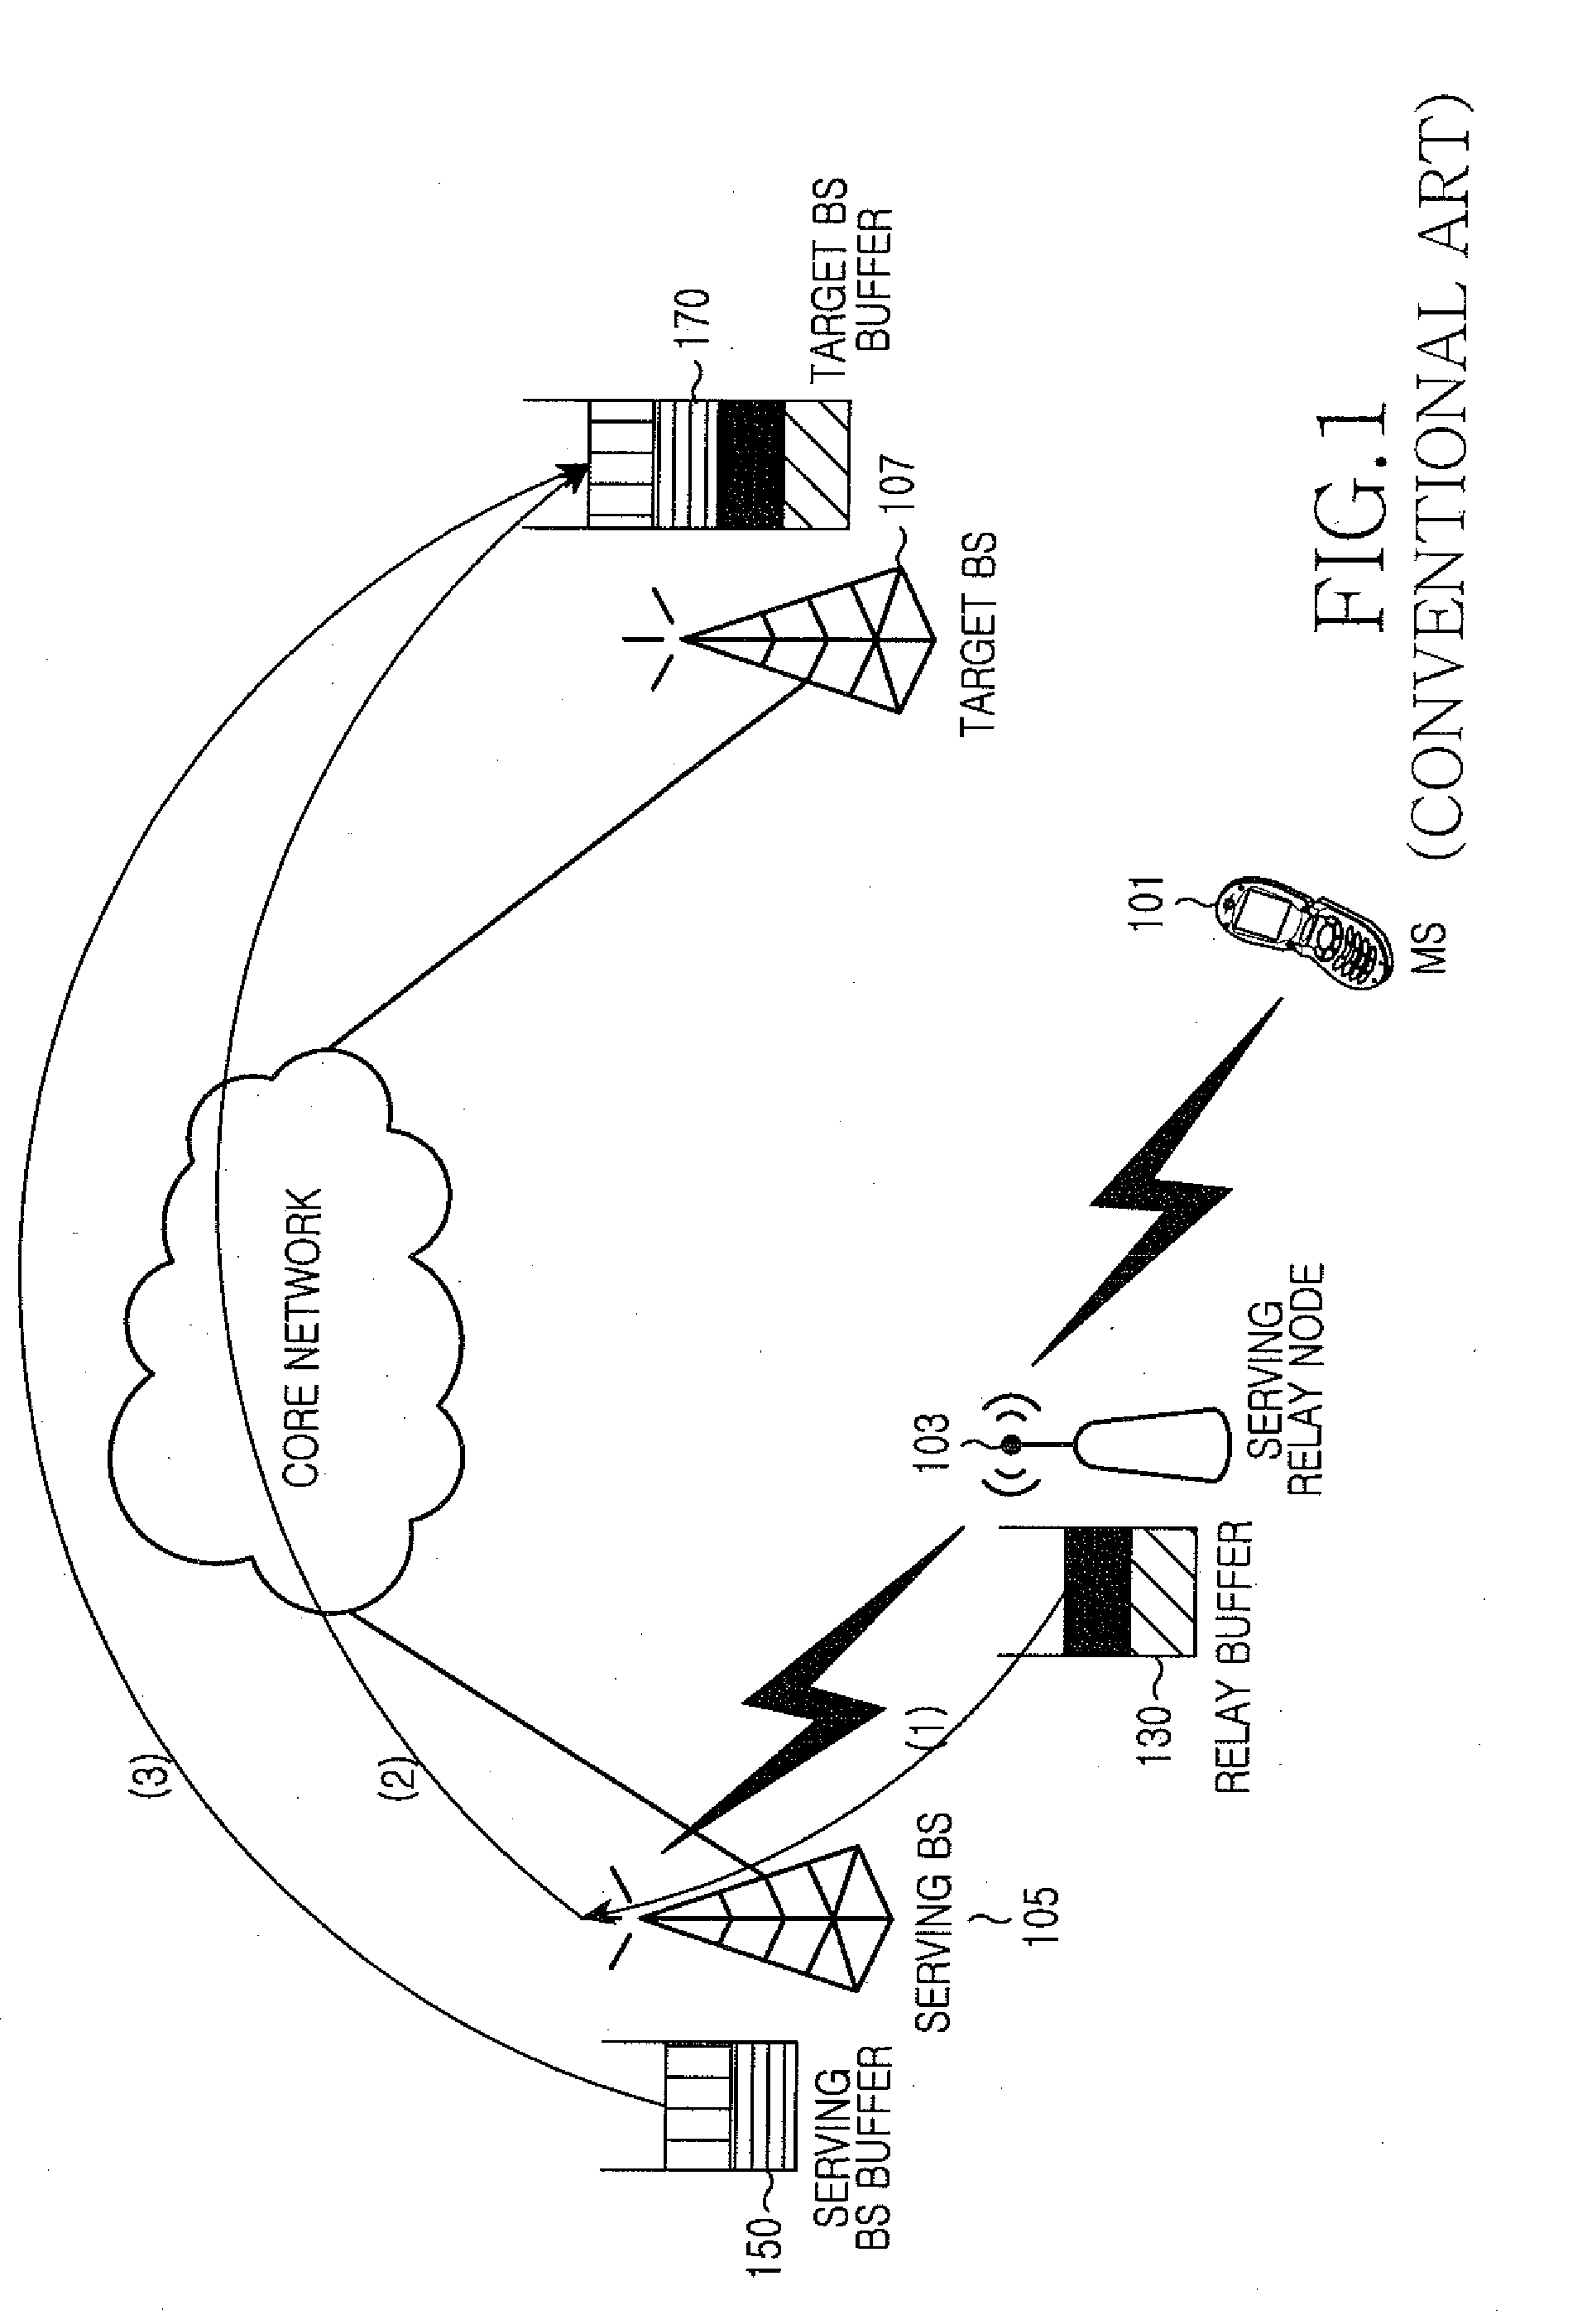 Apparatus and method for buffering packets in a multi-hop relay system supporting hop-by-hop retransmission